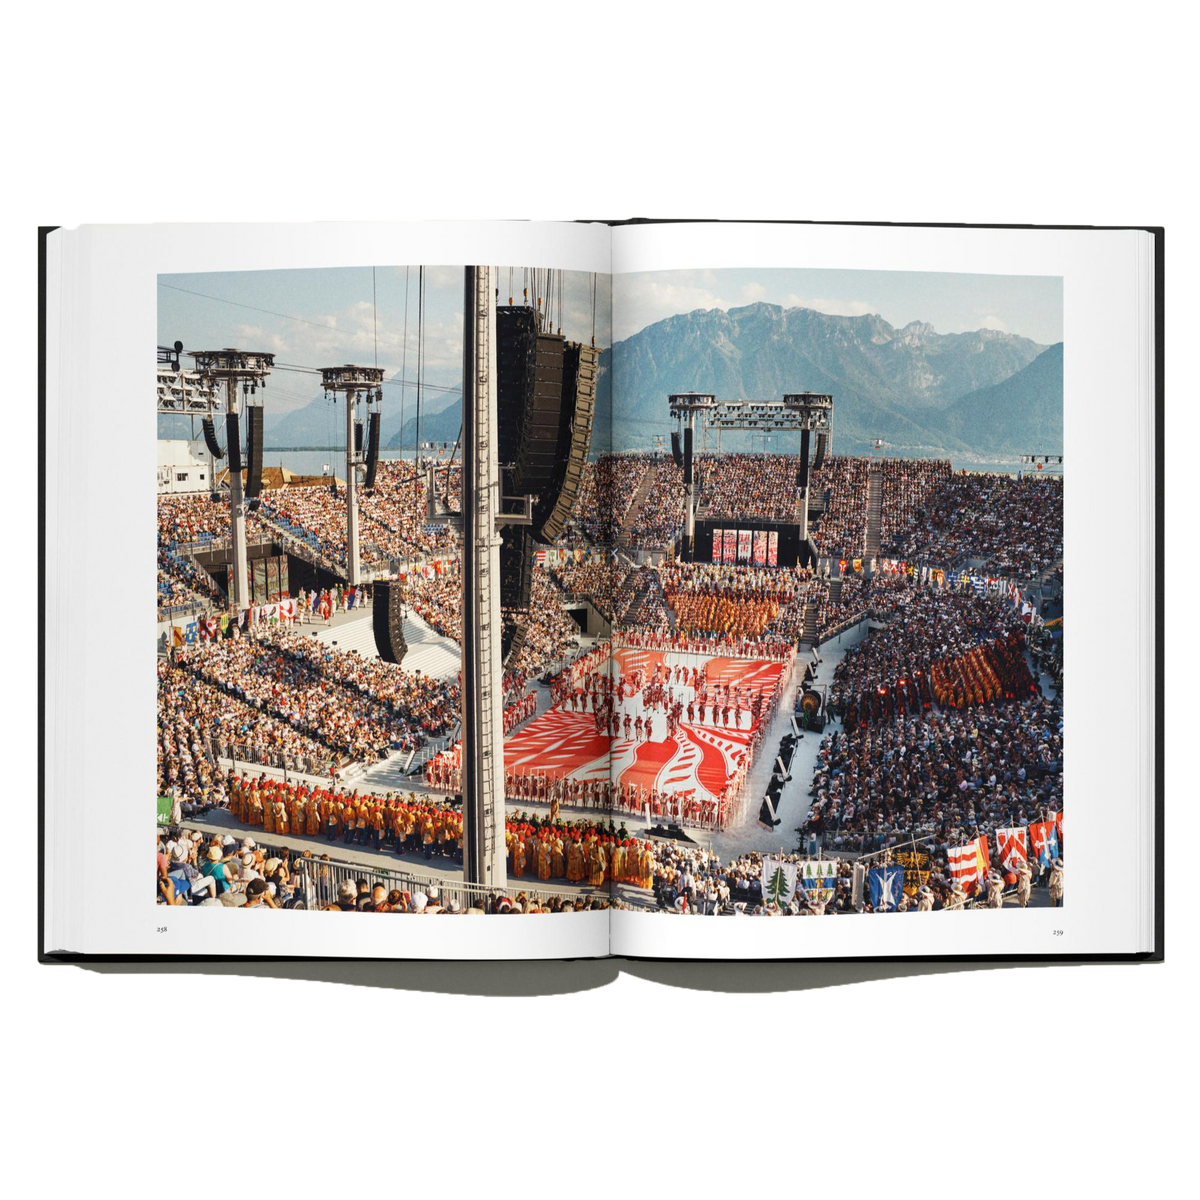 The Monocle Book of Photograph: Reportage from Places less Explored